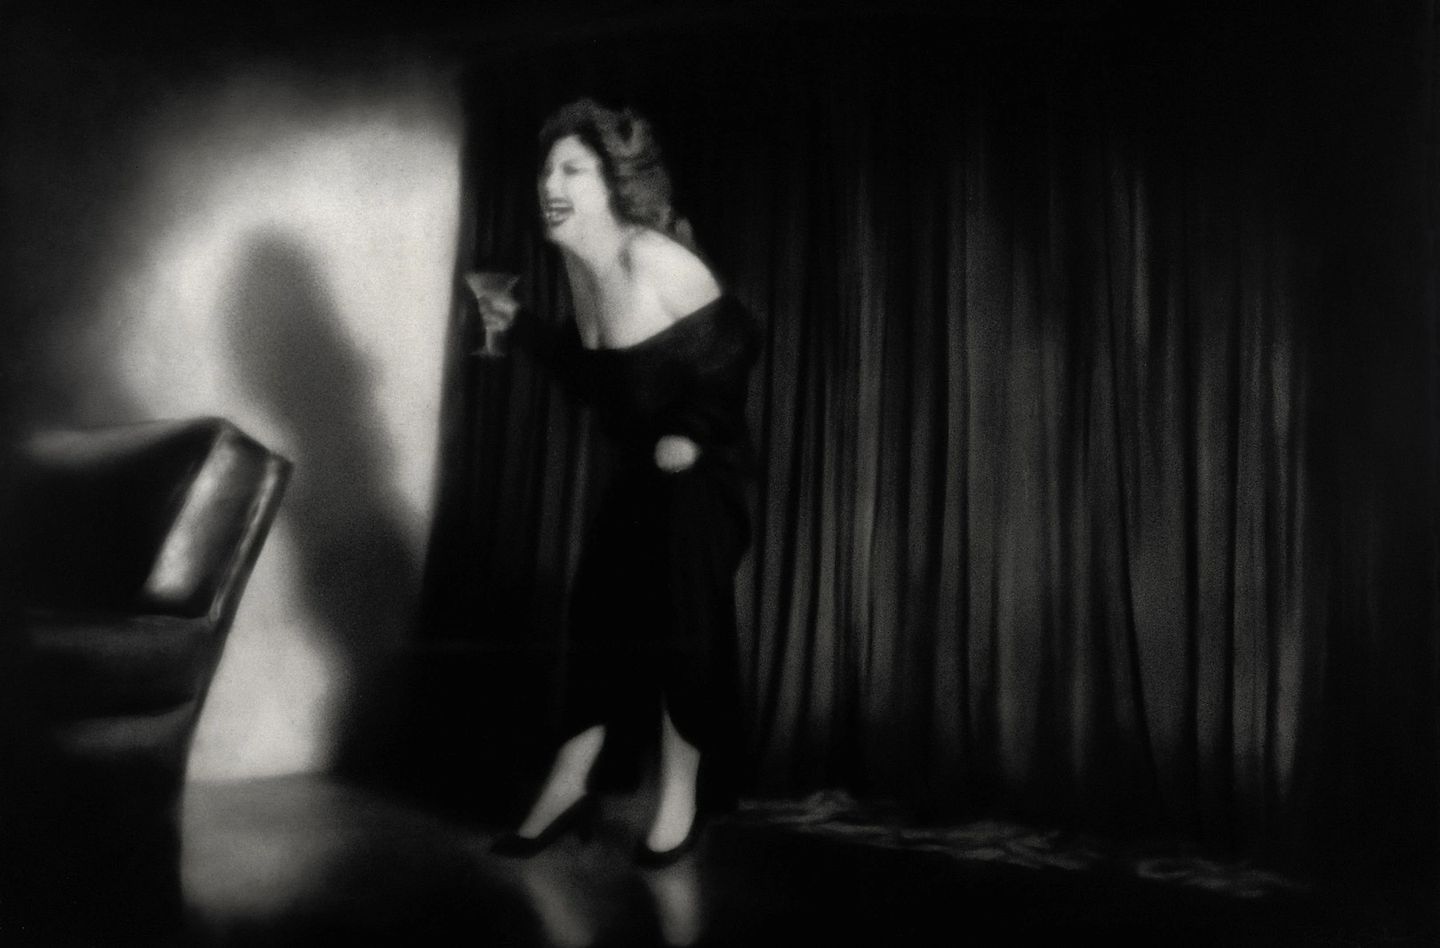 A woman in black dress on stage with curtains.